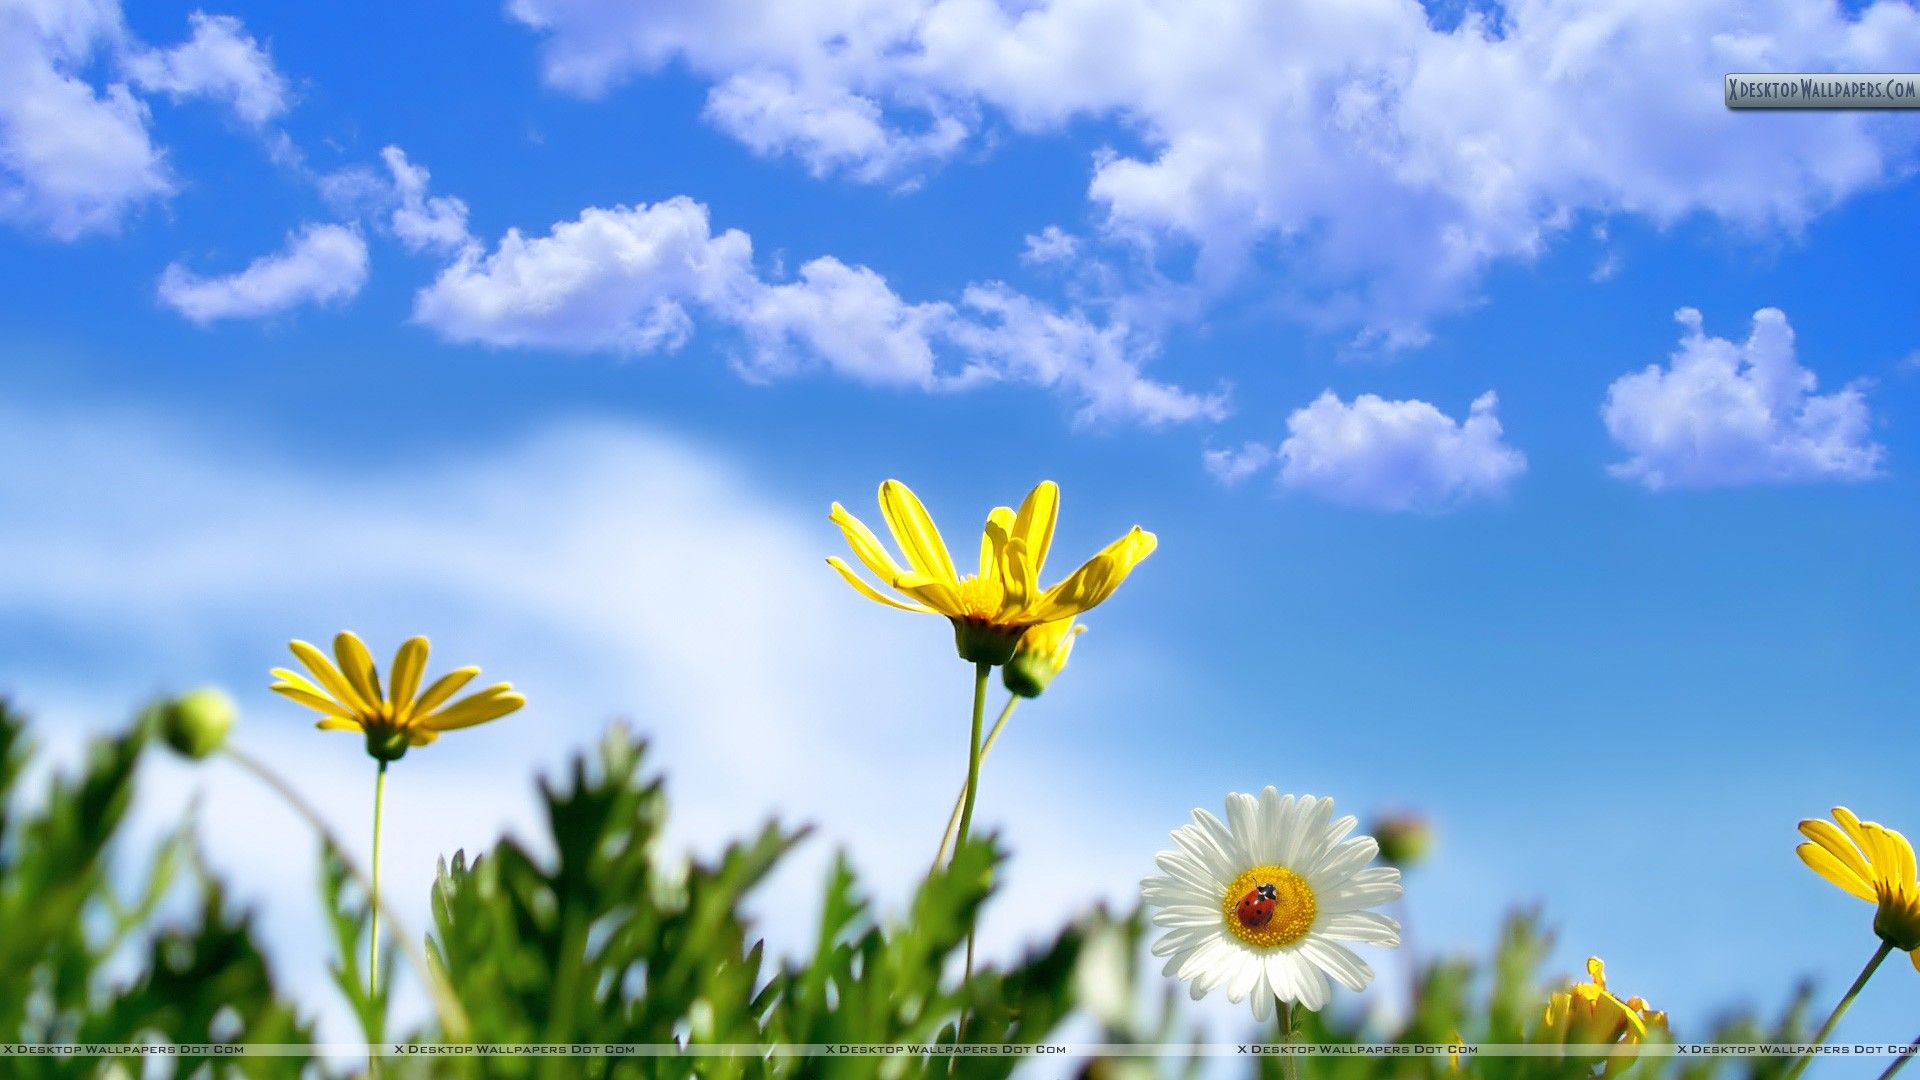 White & Yellow Flower In Spring Time Wallpaper